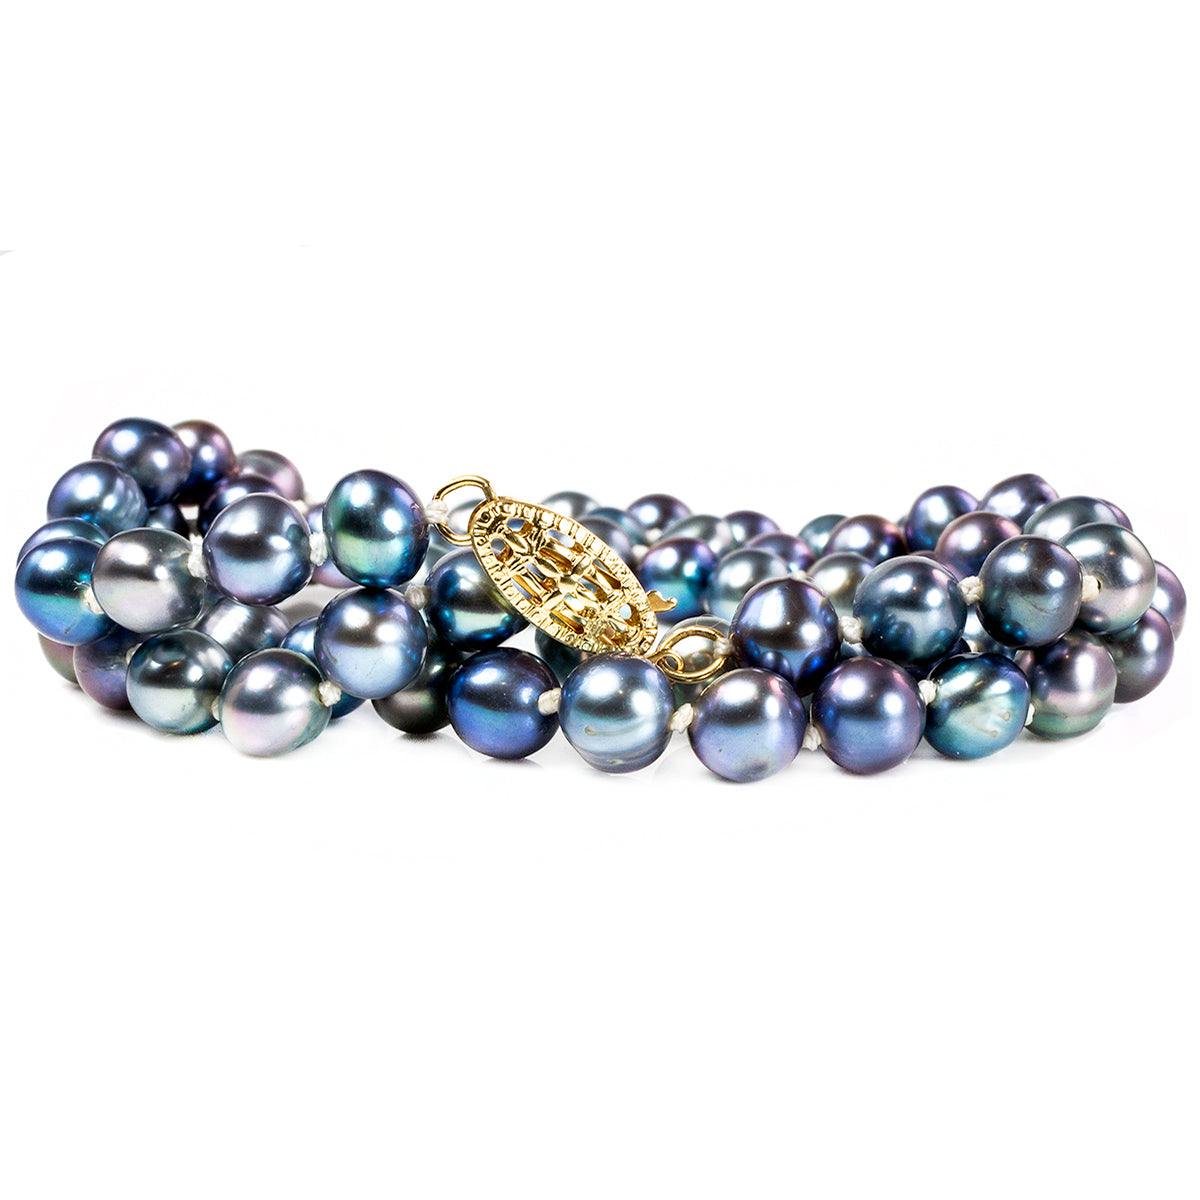 Dyed Pearl Necklace with 14 k Gold Clasp